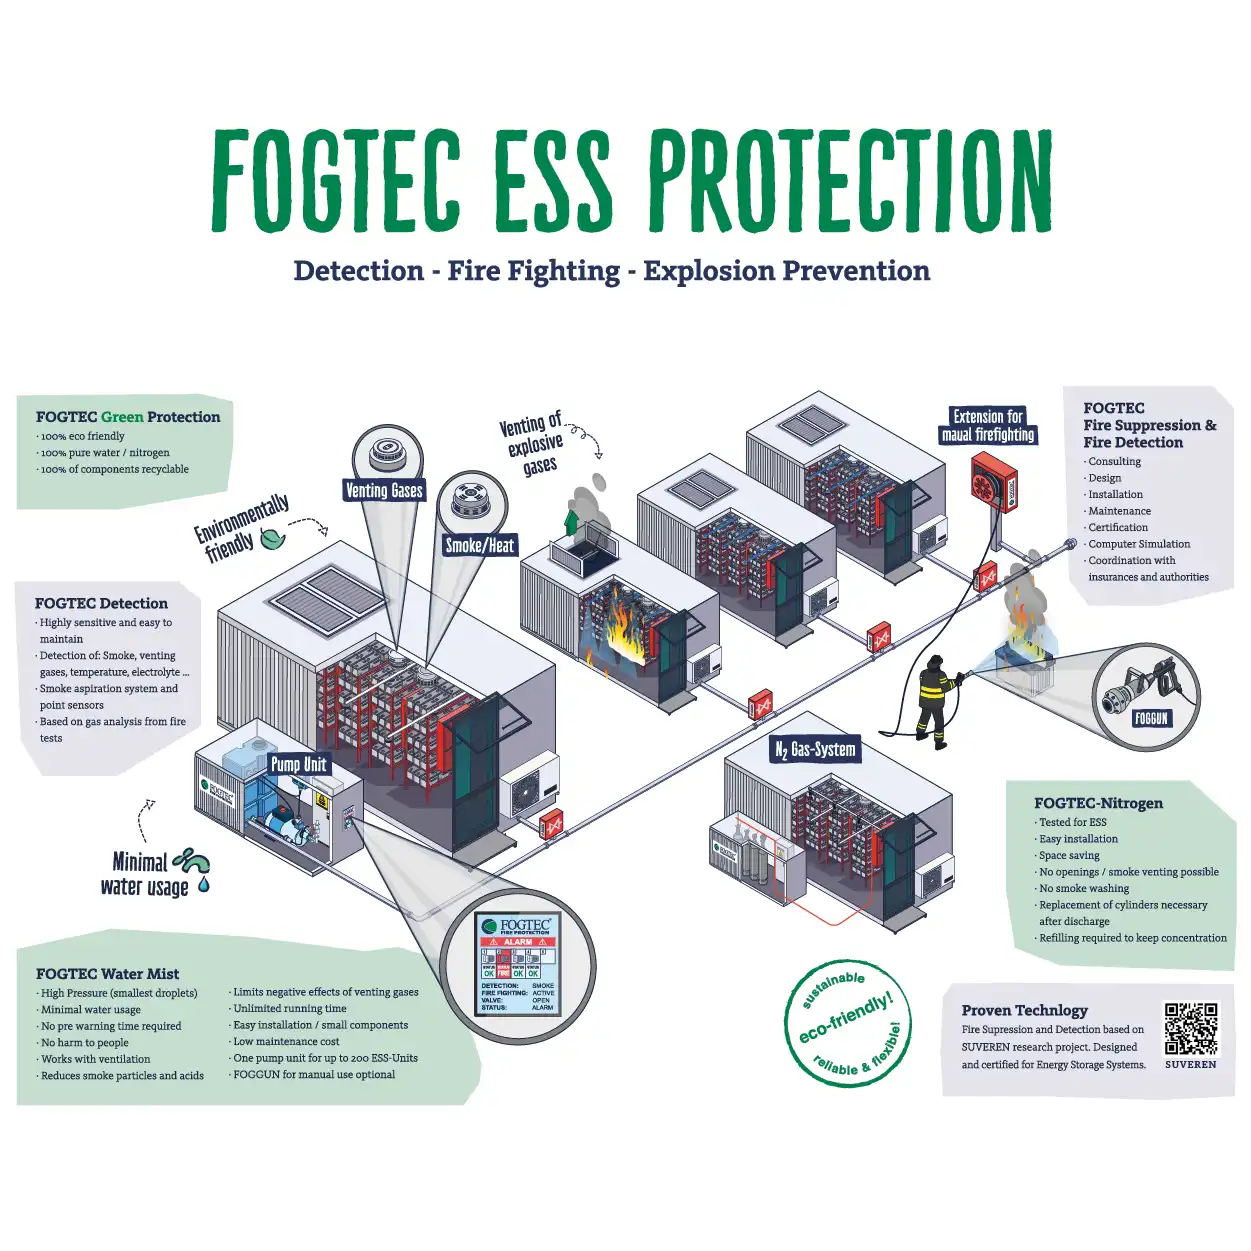 Fogtec ESS Protection